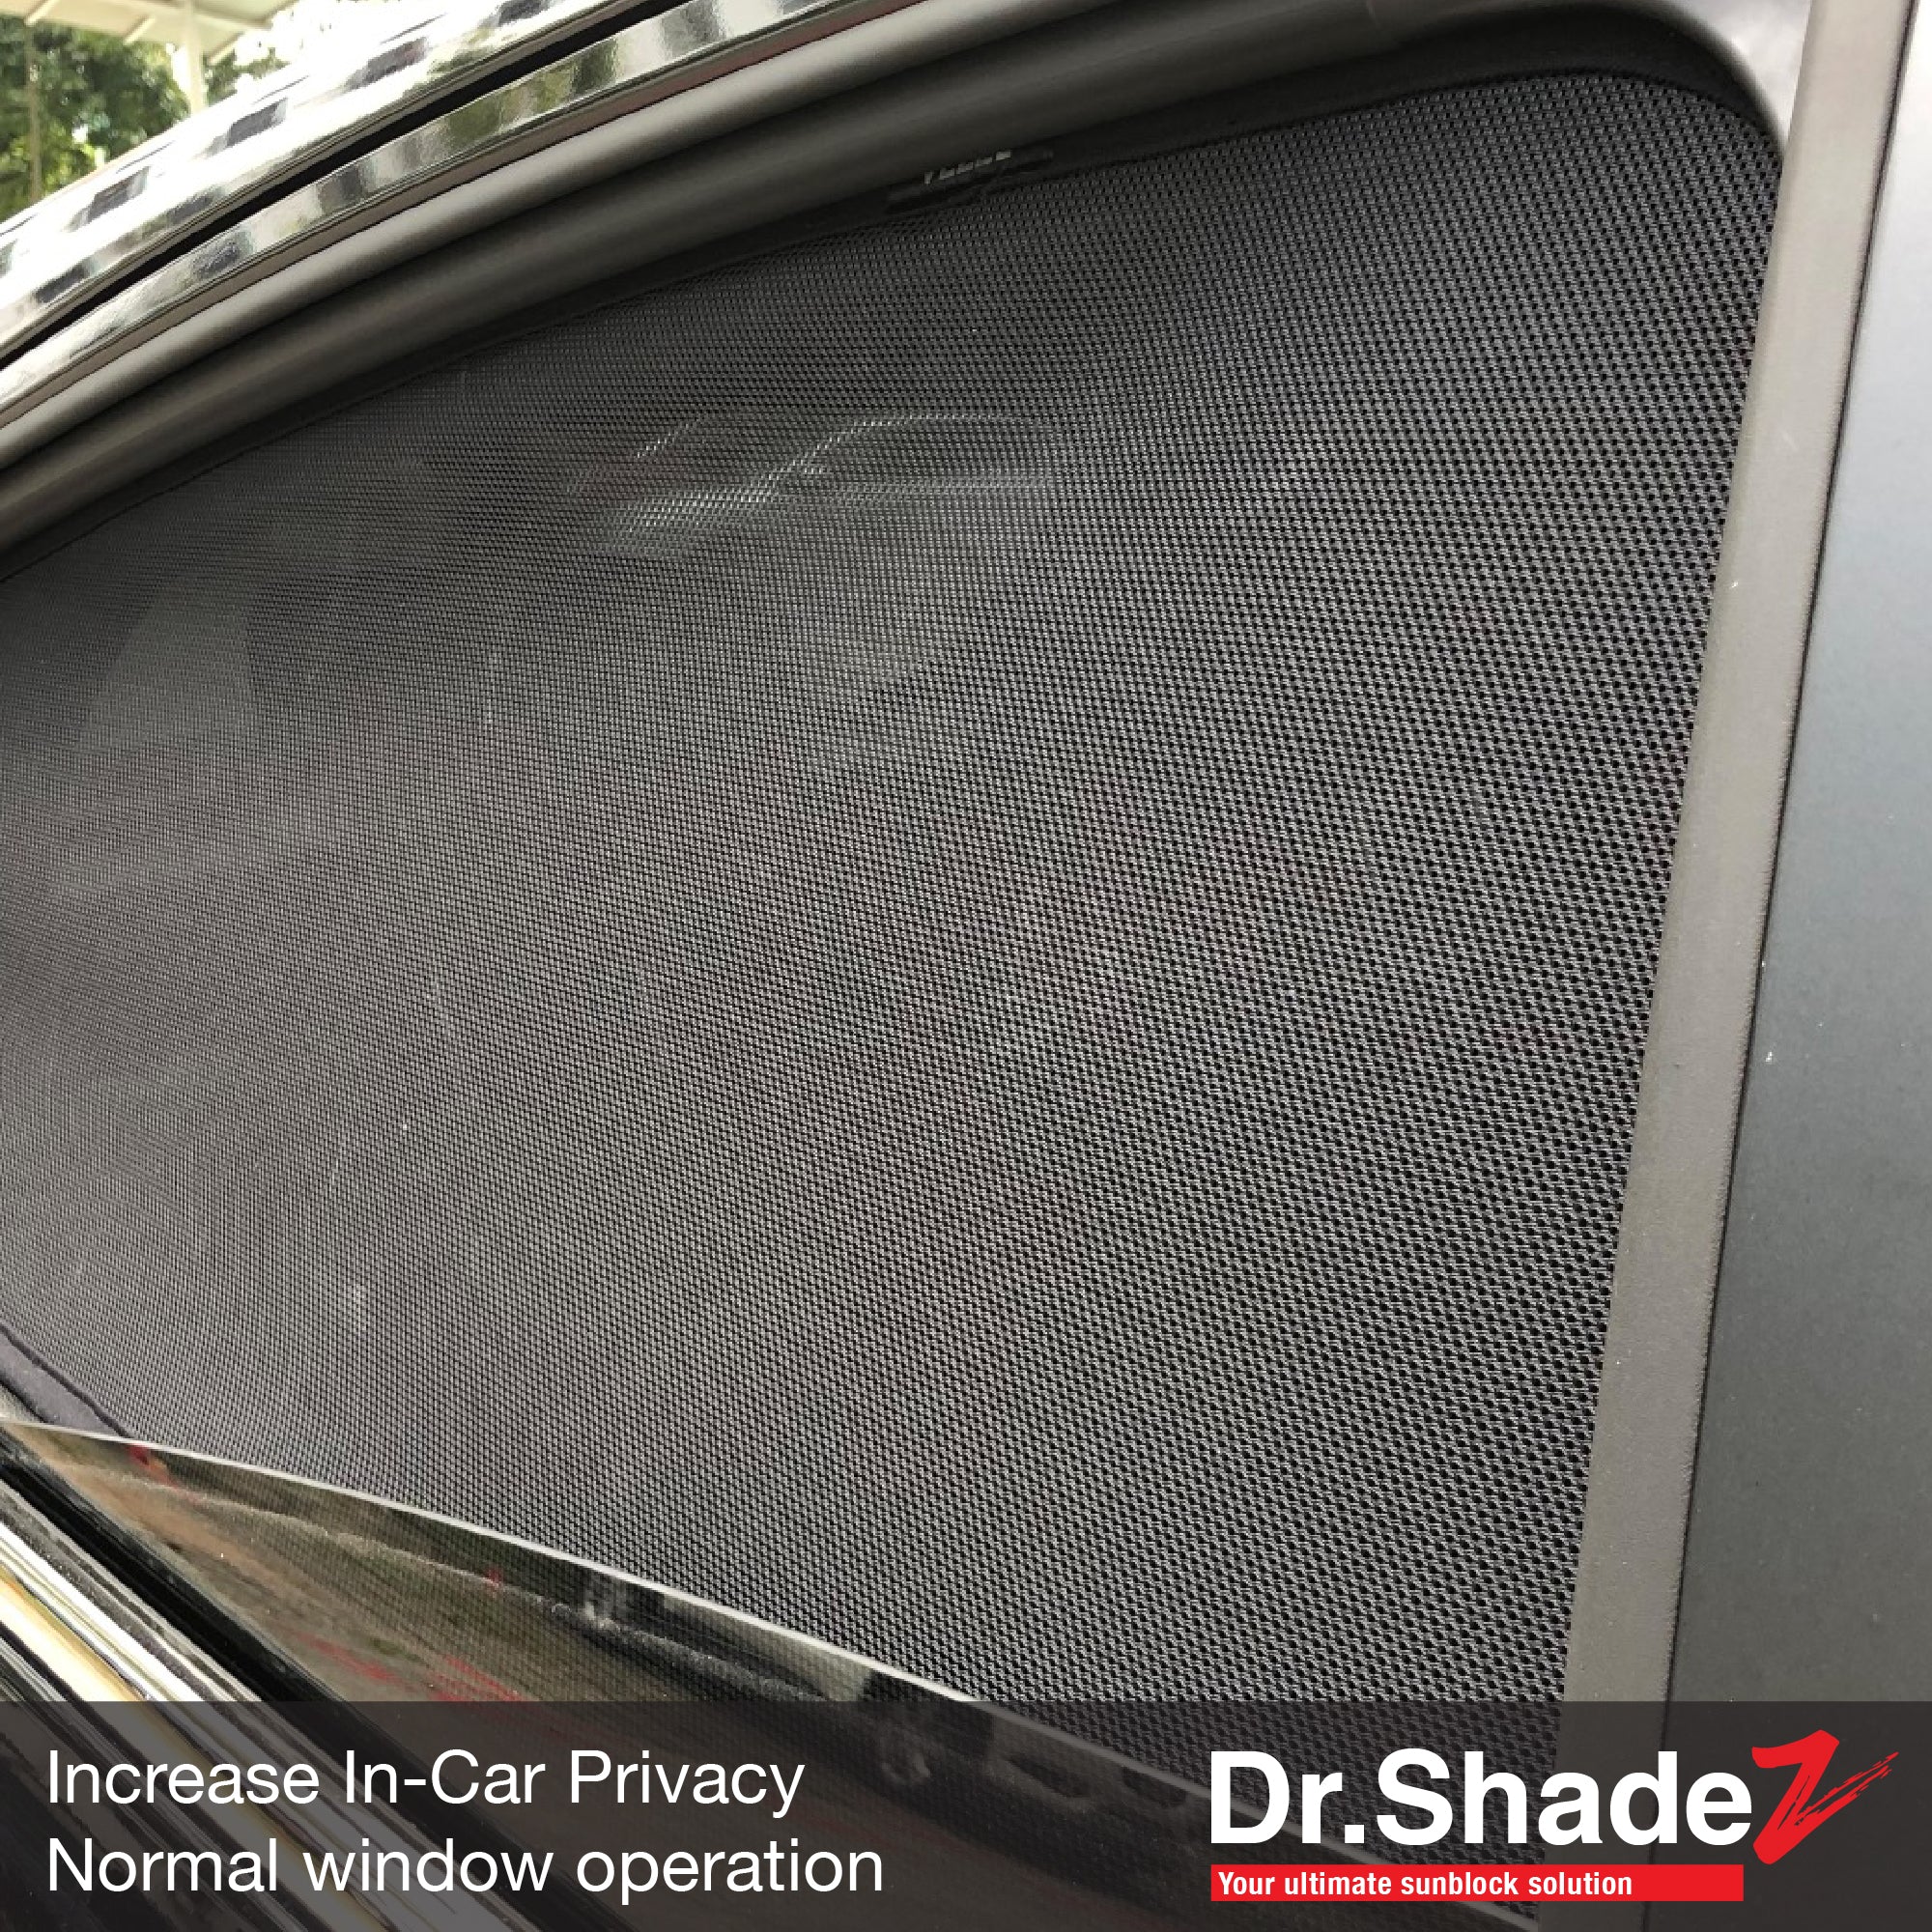 Mercedes Benz C Class 2014-2020 (W205) Germany Compact Executive Customised Car Window Magnetic Sunshades